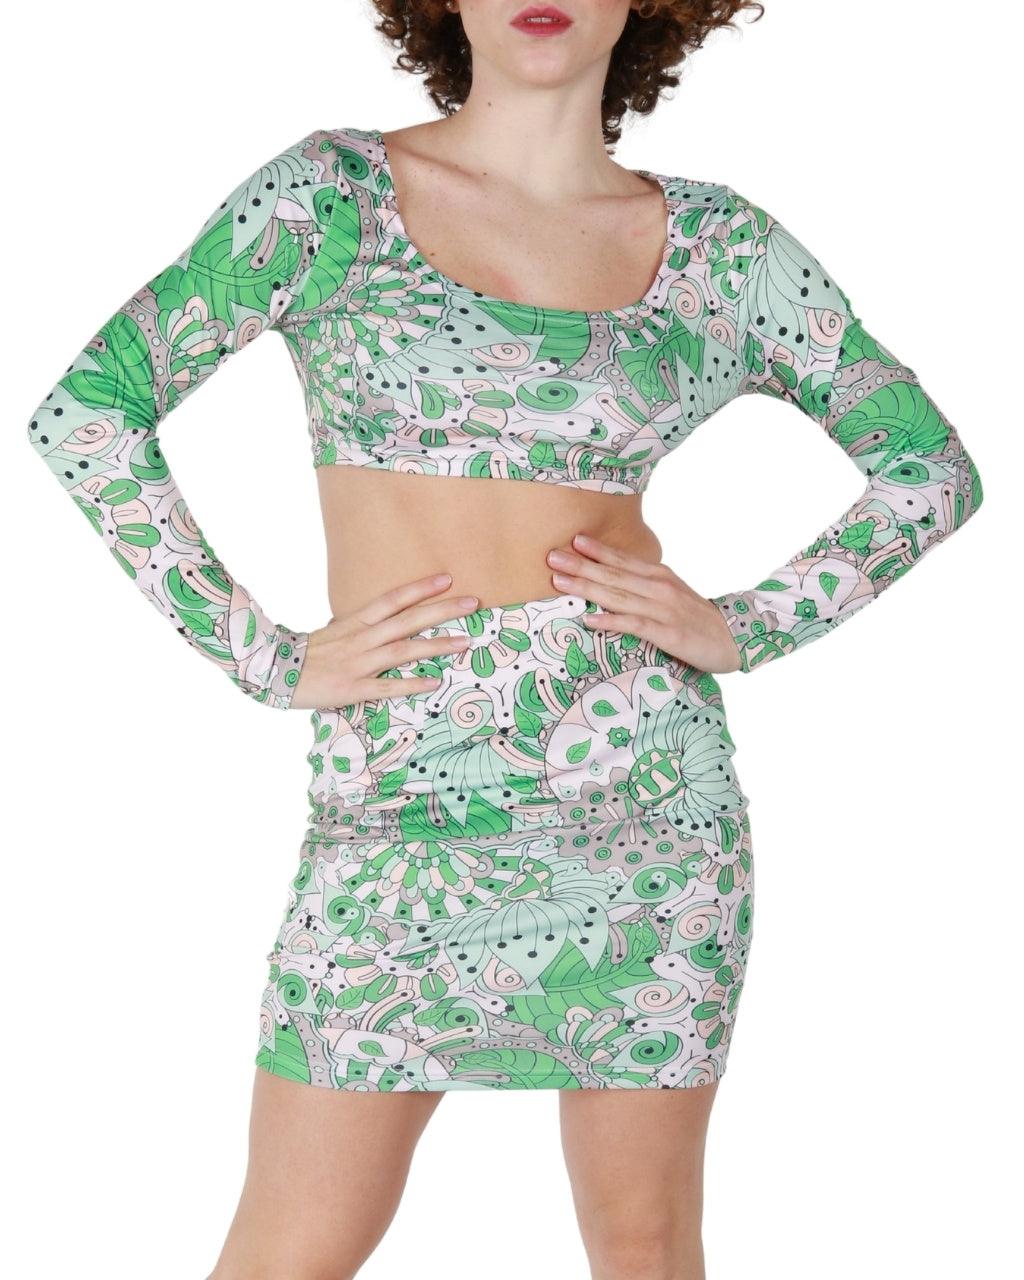 Midoria Crop Top & Fitted Skirt Set - Blissfully Brand